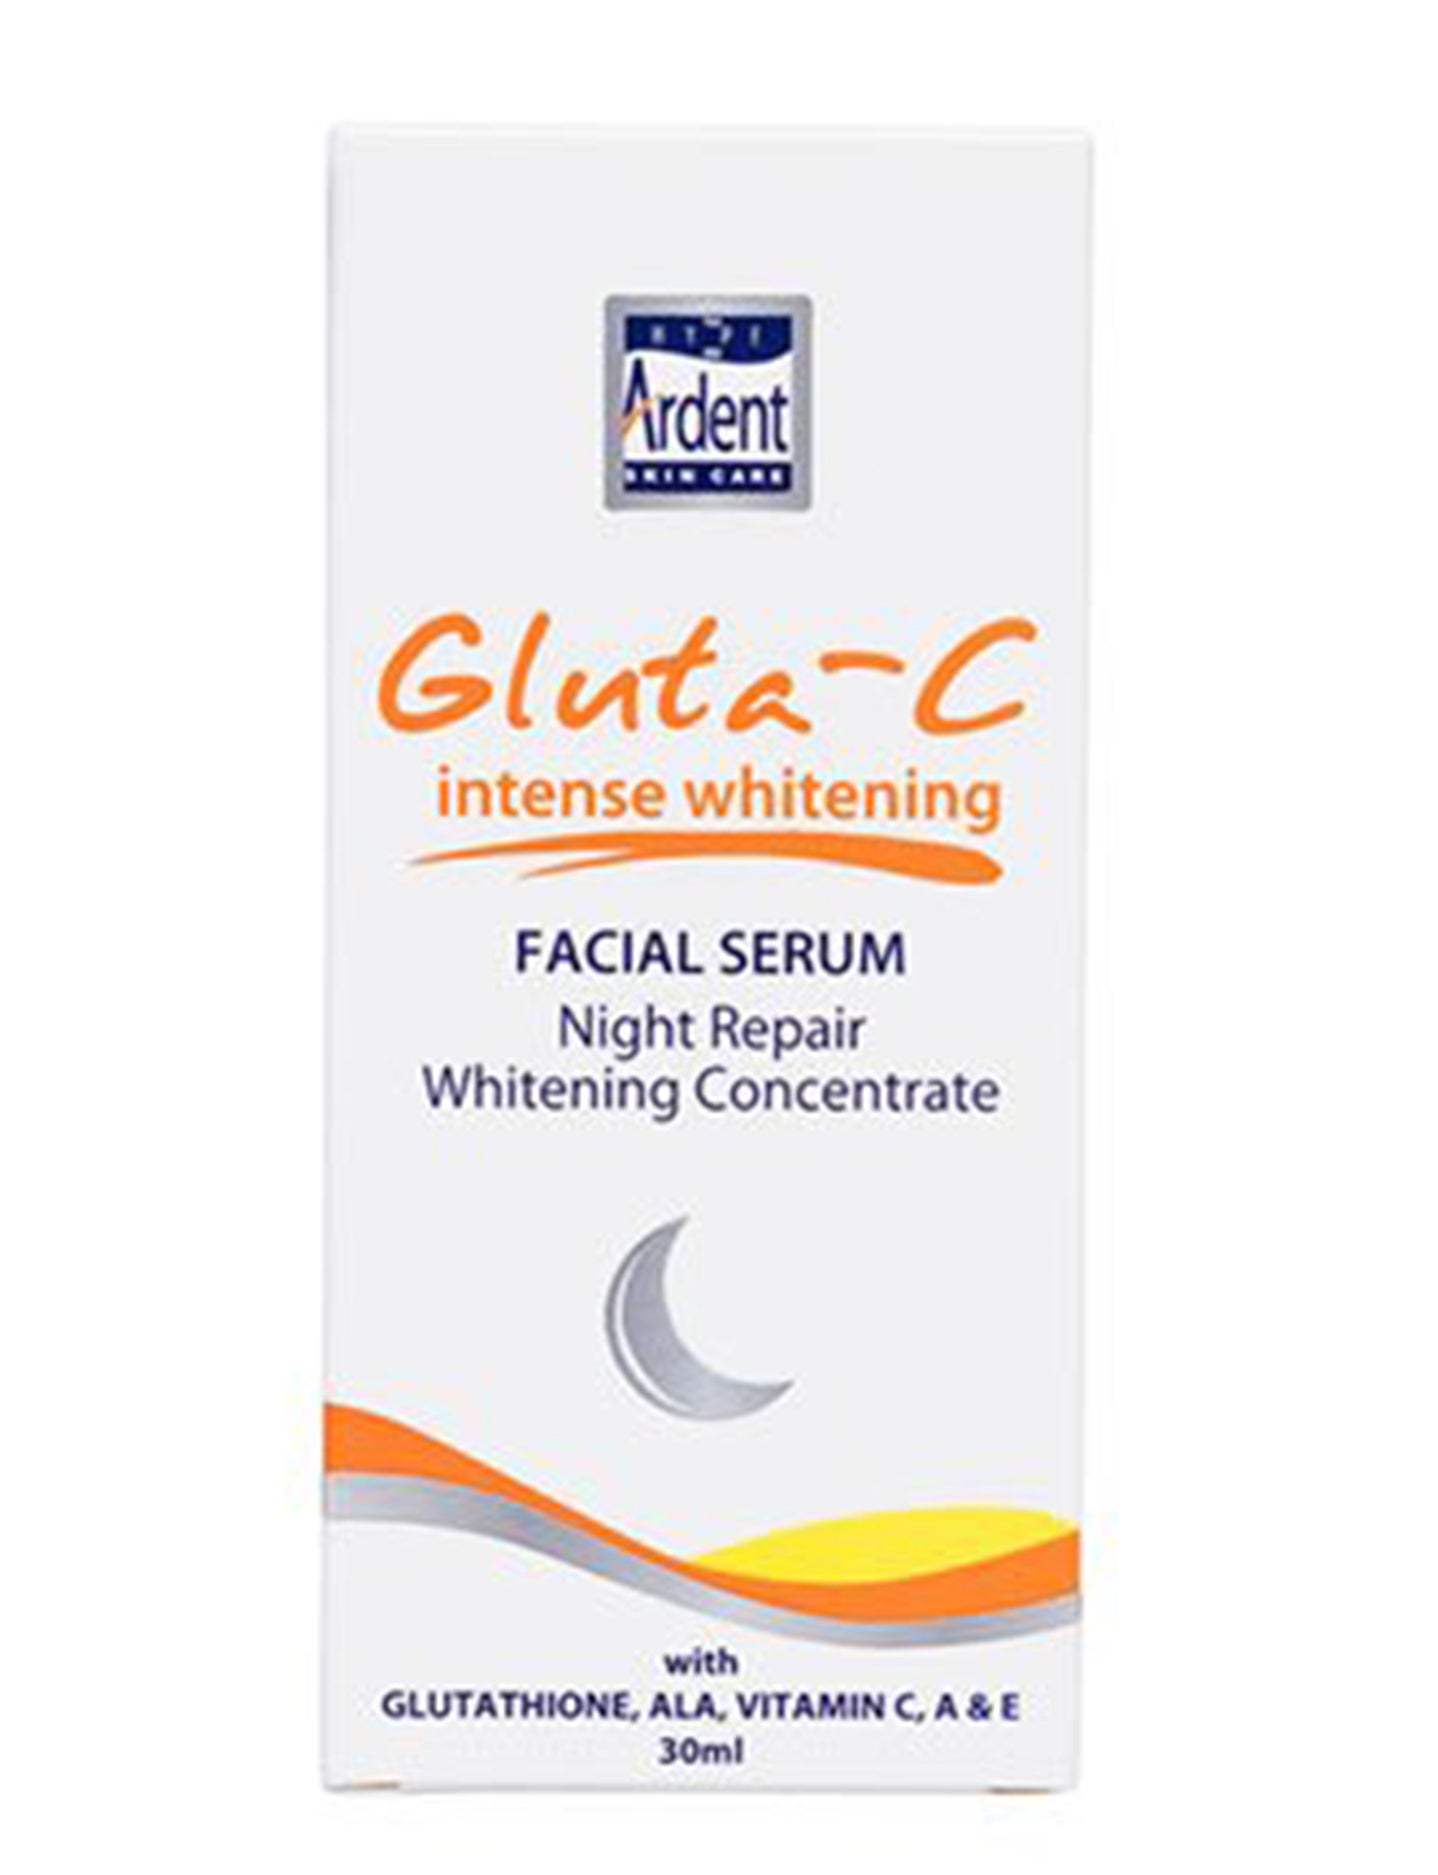 GlutaC intense whitening Facial Serum Night Repair Whitening Concentrate 30ml Value Pack of 12 